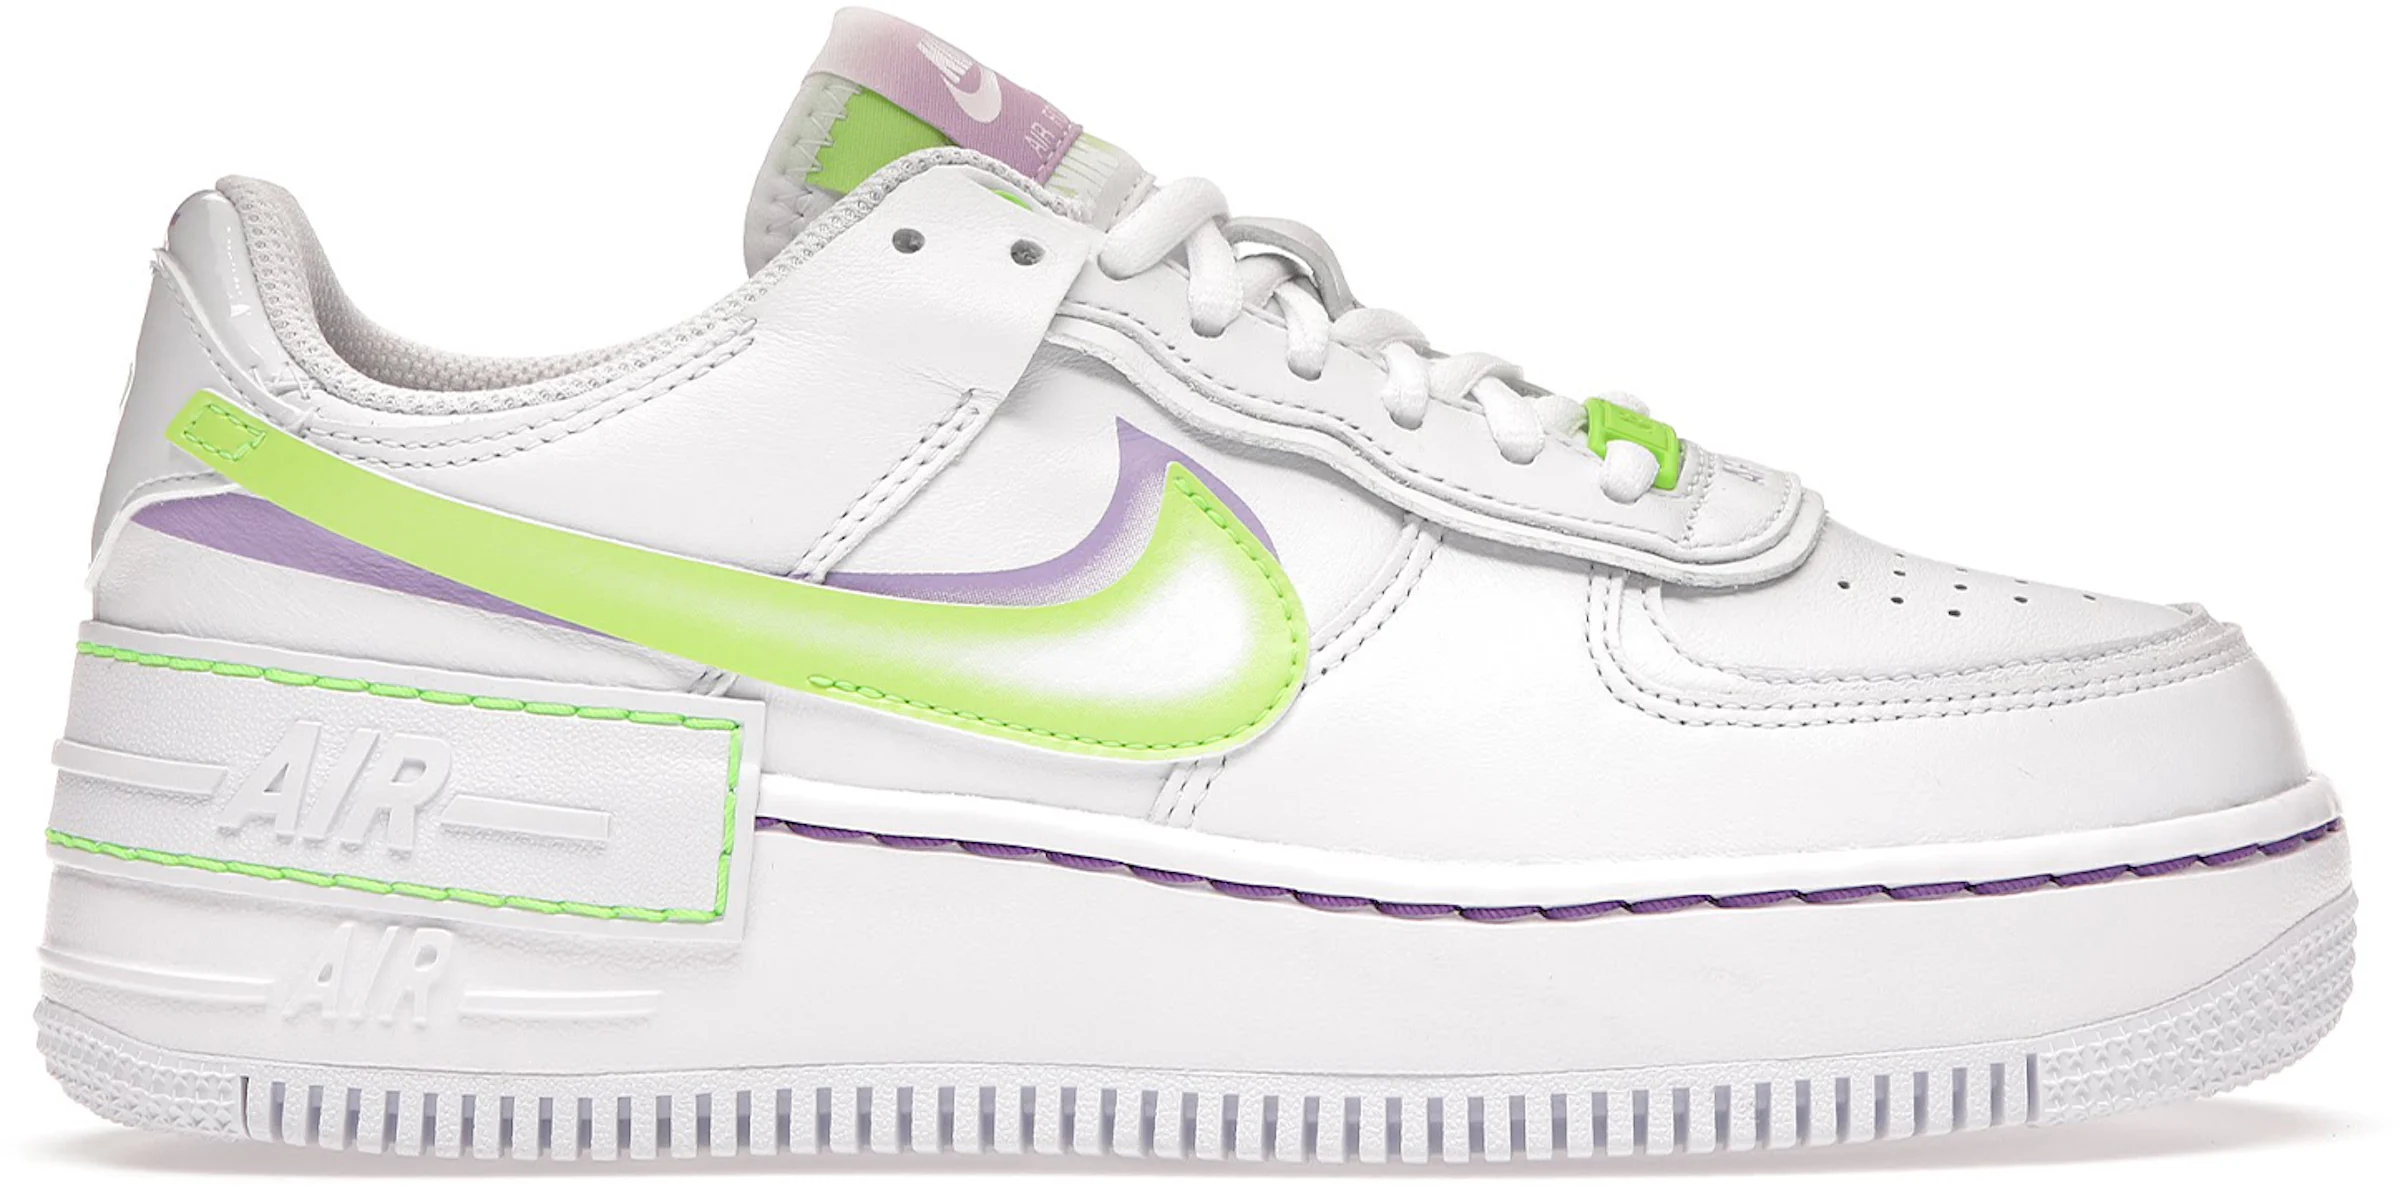 Nike Air Force 1 Low Shadow White Electric Green (Women's) - DD9684-100 - US